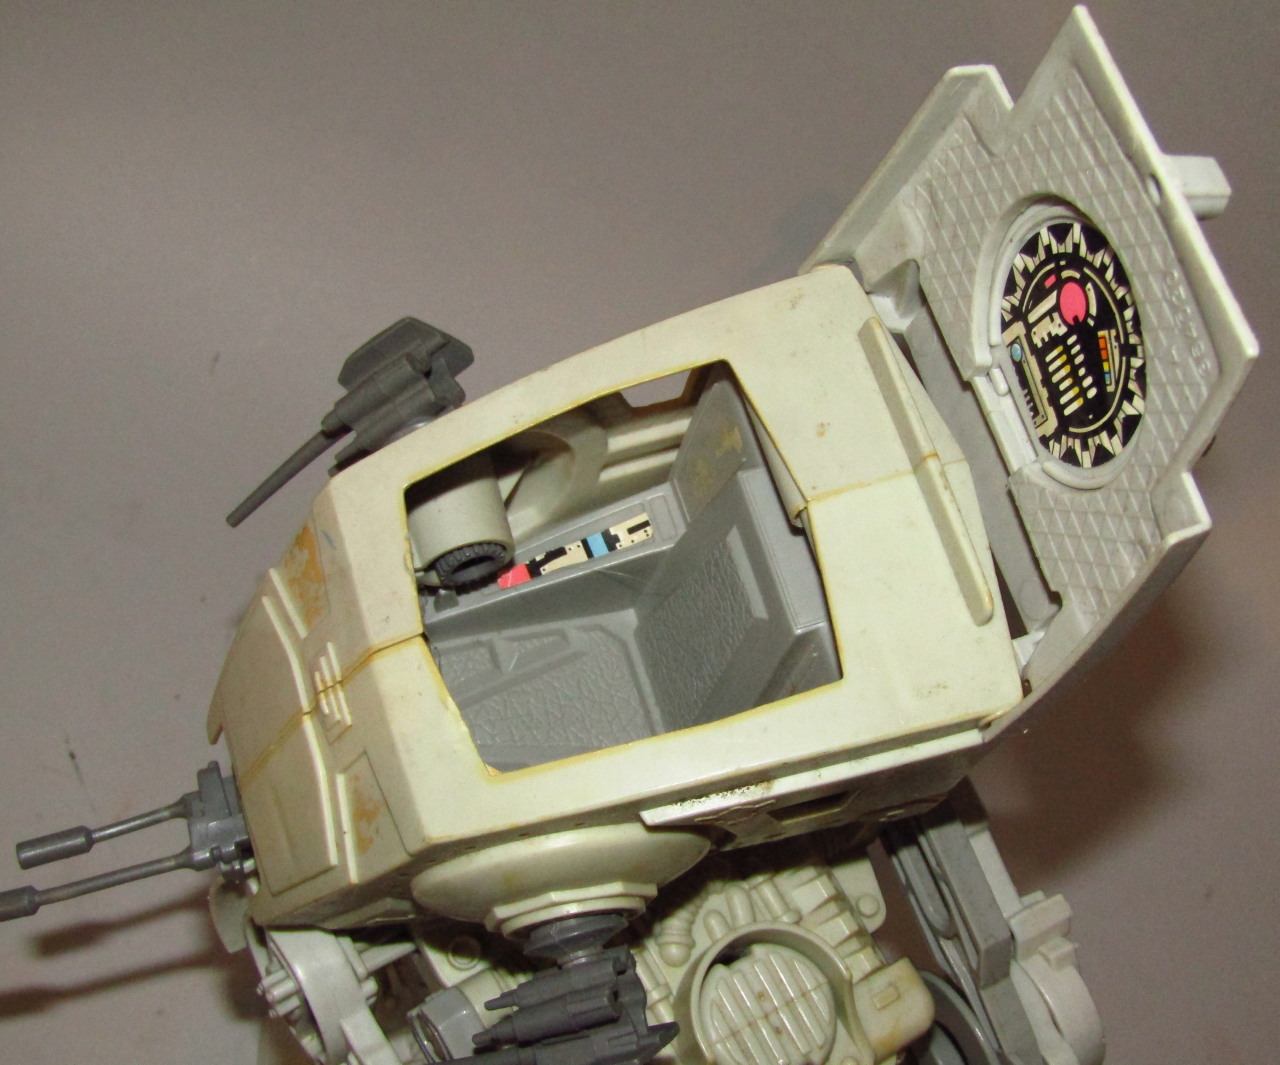 A Lucas film limited Star Wars 1982 edition AT-ST, with articulated legs and other ships and - Image 6 of 7